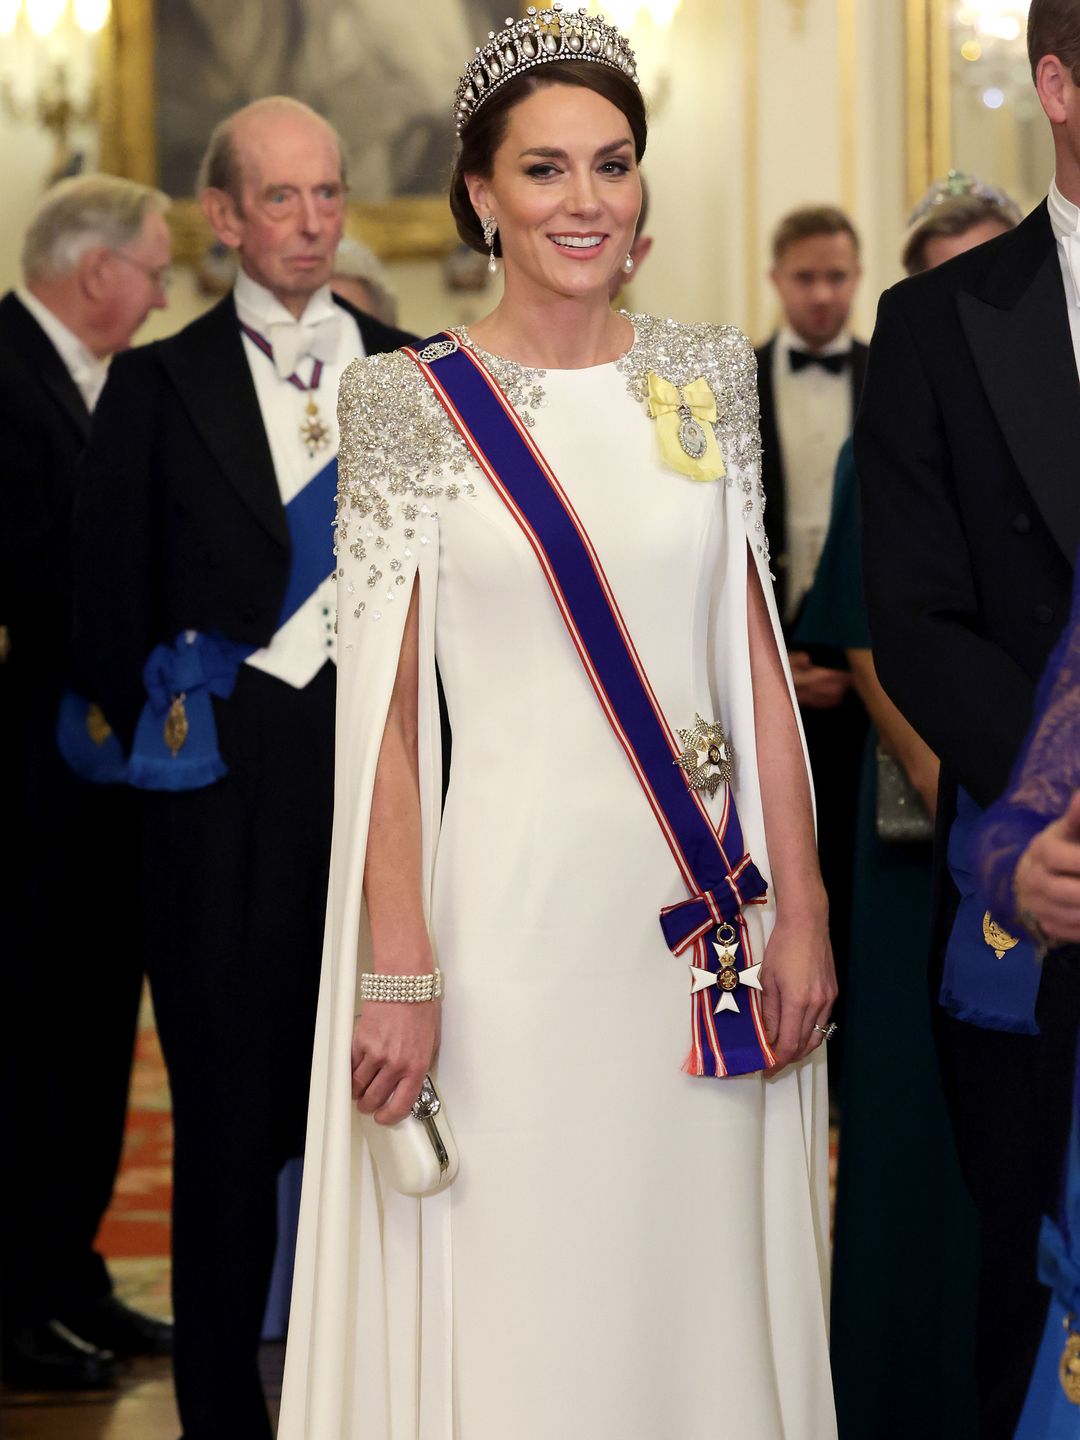 Catherine, Princess of Wales during the State Banquet at Buckingham Palace wearing Jenny Packham